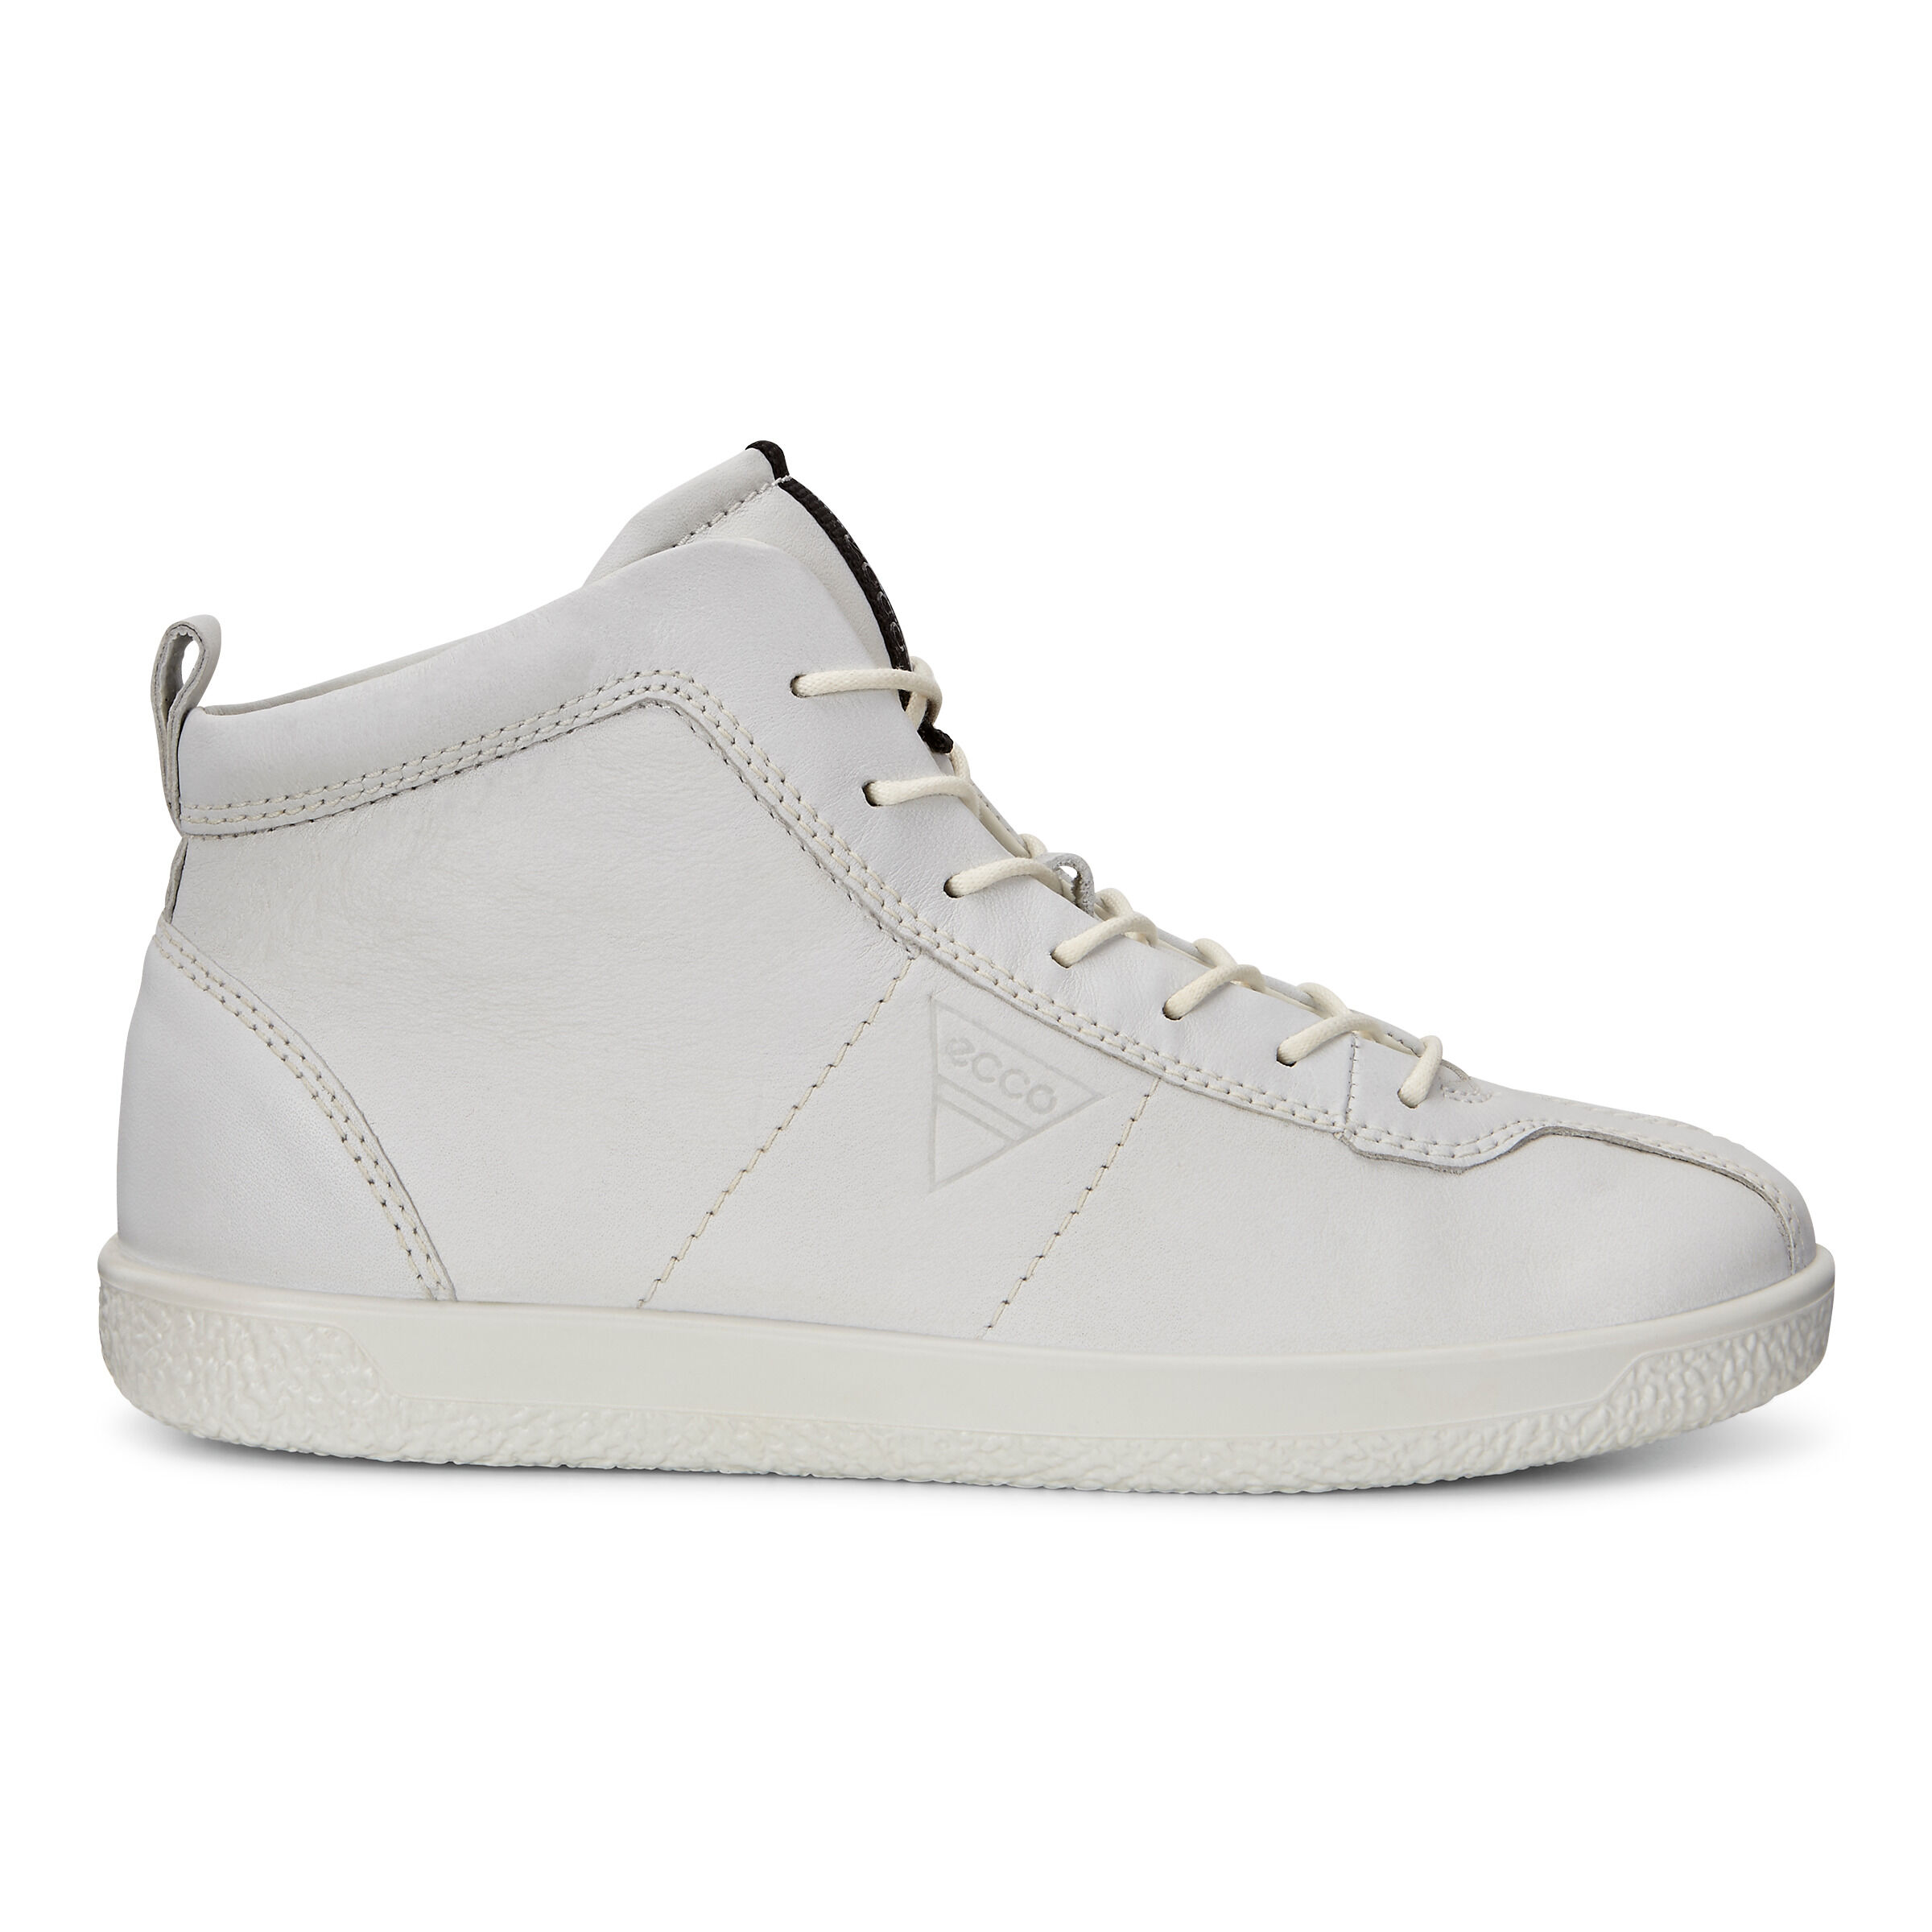 Soft 1 High Top Sneakers | ECCO® Shoes